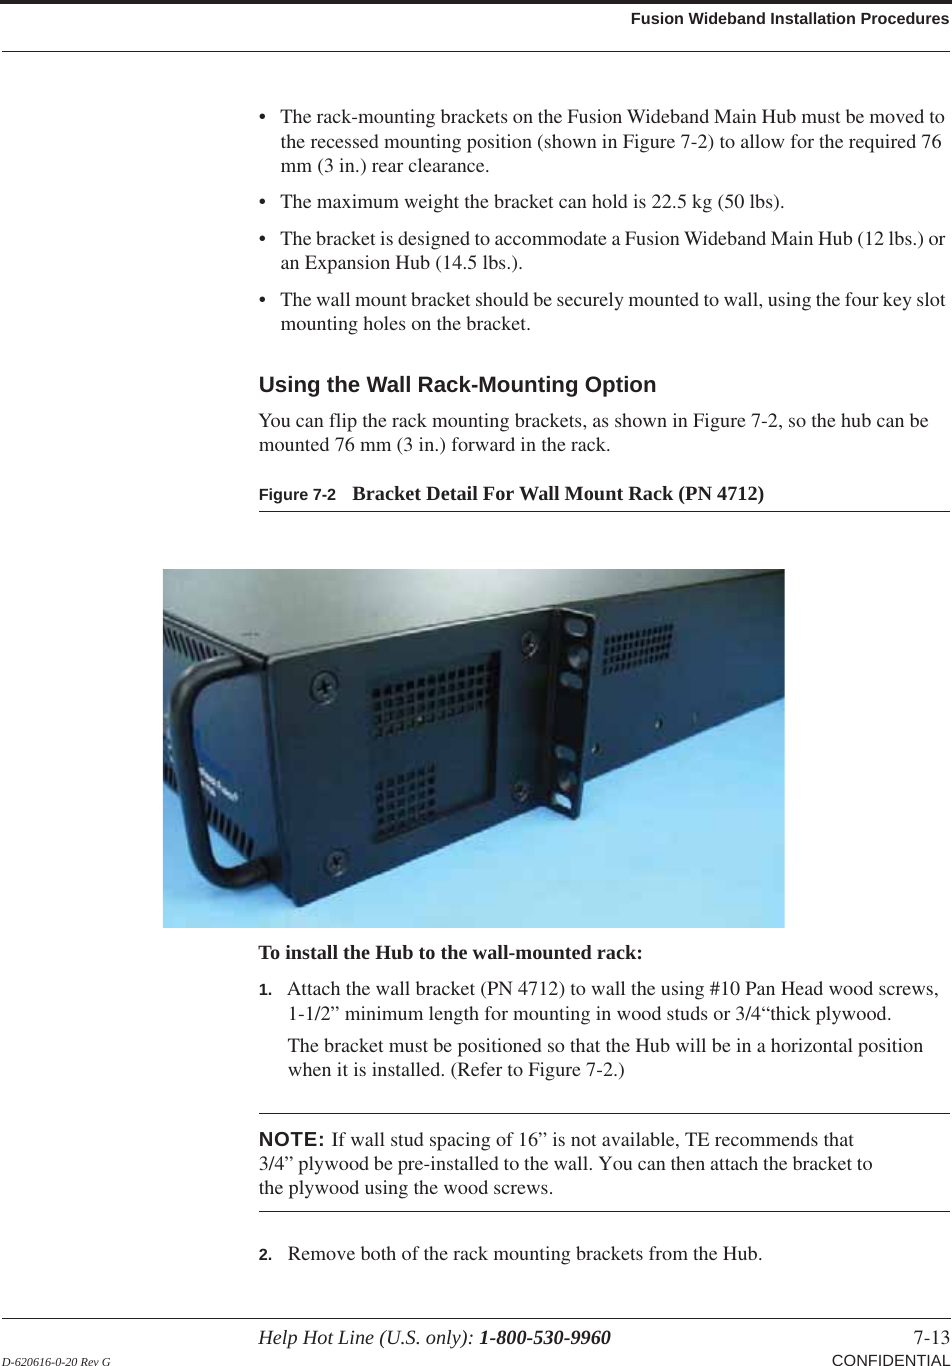 Help Hot Line (U.S. only): 1-800-530-9960 7-13 D-620616-0-20 Rev G CONFIDENTIALFusion Wideband Installation Procedures• The rack-mounting brackets on the Fusion Wideband Main Hub must be moved to the recessed mounting position (shown in Figure  7-2) to allow for the required 76 mm (3 in.) rear clearance.• The maximum weight the bracket can hold is 22.5 kg (50 lbs).• The bracket is designed to accommodate a Fusion Wideband Main Hub (12 lbs.) or an Expansion Hub (14.5 lbs.).• The wall mount bracket should be securely mounted to wall, using the four key slot mounting holes on the bracket.Using the Wall Rack-Mounting OptionYou can flip the rack mounting brackets, as shown in Figure  7-2, so the hub can be mounted 76 mm (3 in.) forward in the rack.Figure 7-2 Bracket Detail For Wall Mount Rack (PN 4712)To install the Hub to the wall-mounted rack:1. Attach the wall bracket (PN 4712) to wall the using #10 Pan Head wood screws, 1-1/2” minimum length for mounting in wood studs or 3/4“thick plywood.The bracket must be positioned so that the Hub will be in a horizontal position when it is installed. (Refer to Figure 7-2.)NOTE: If wall stud spacing of 16” is not available, TE recommends that 3/4” plywood be pre-installed to the wall. You can then attach the bracket to the plywood using the wood screws.2. Remove both of the rack mounting brackets from the Hub.